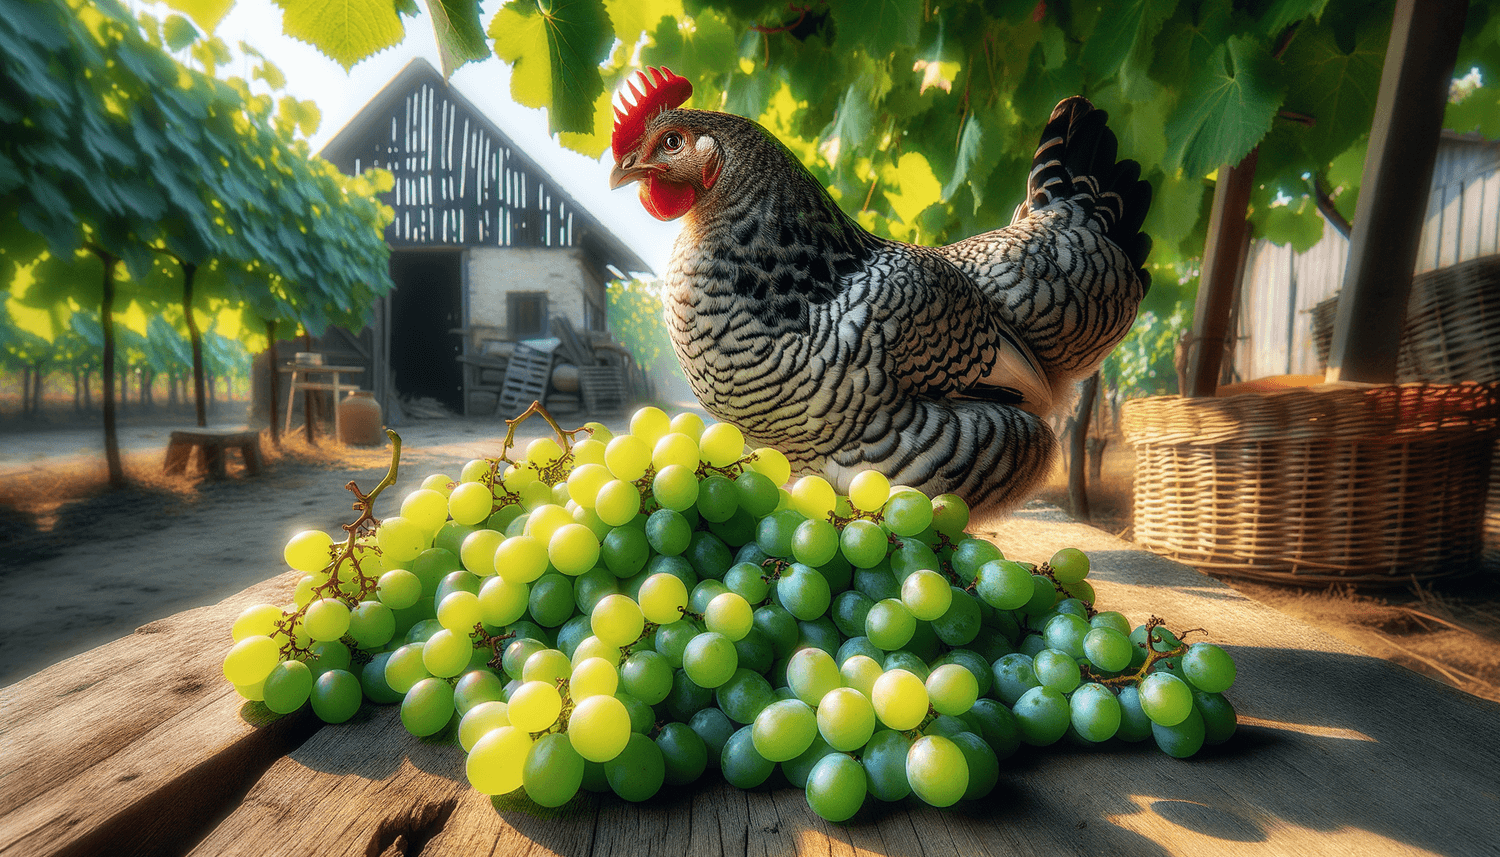 Can Chickens Eat Green Grapes?